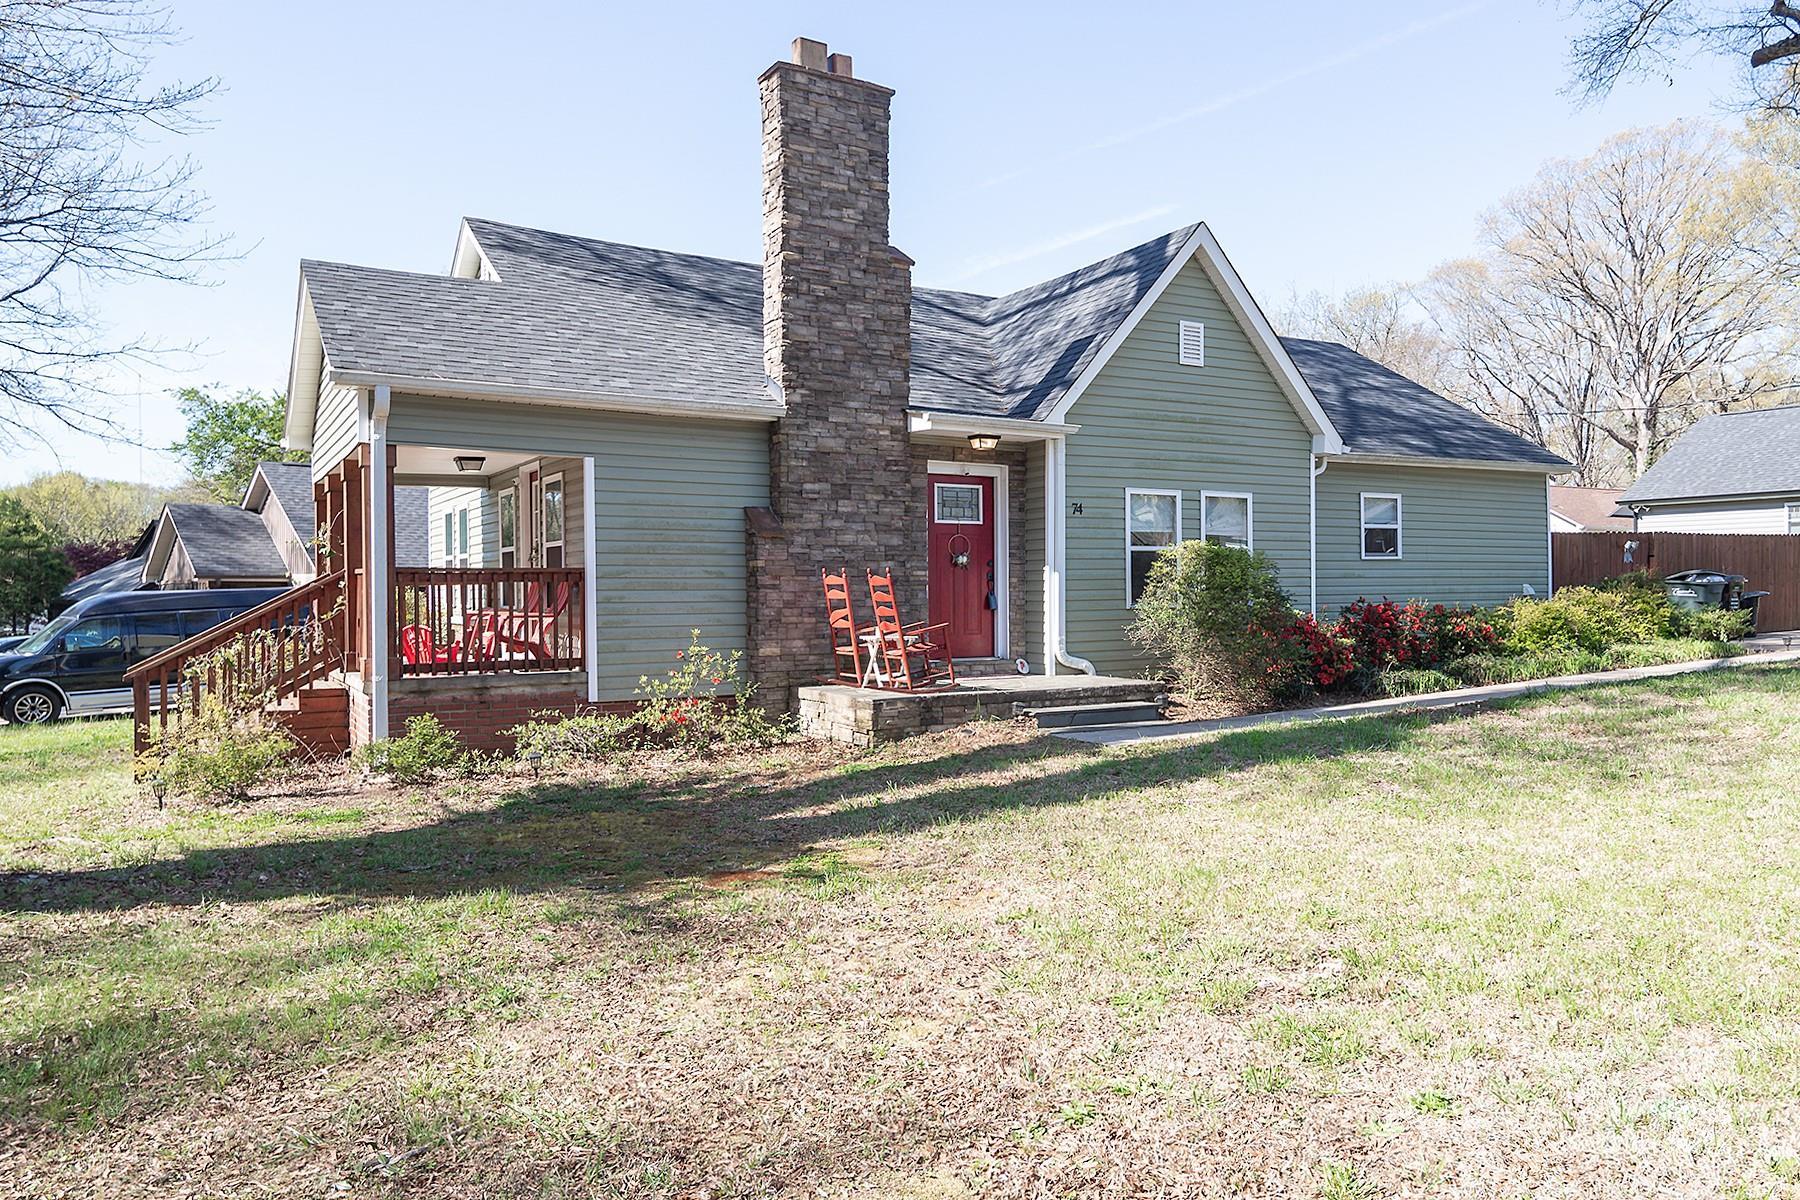 Photo one of 74 Highland Sw Ave Concord NC 28027 | MLS 4122305